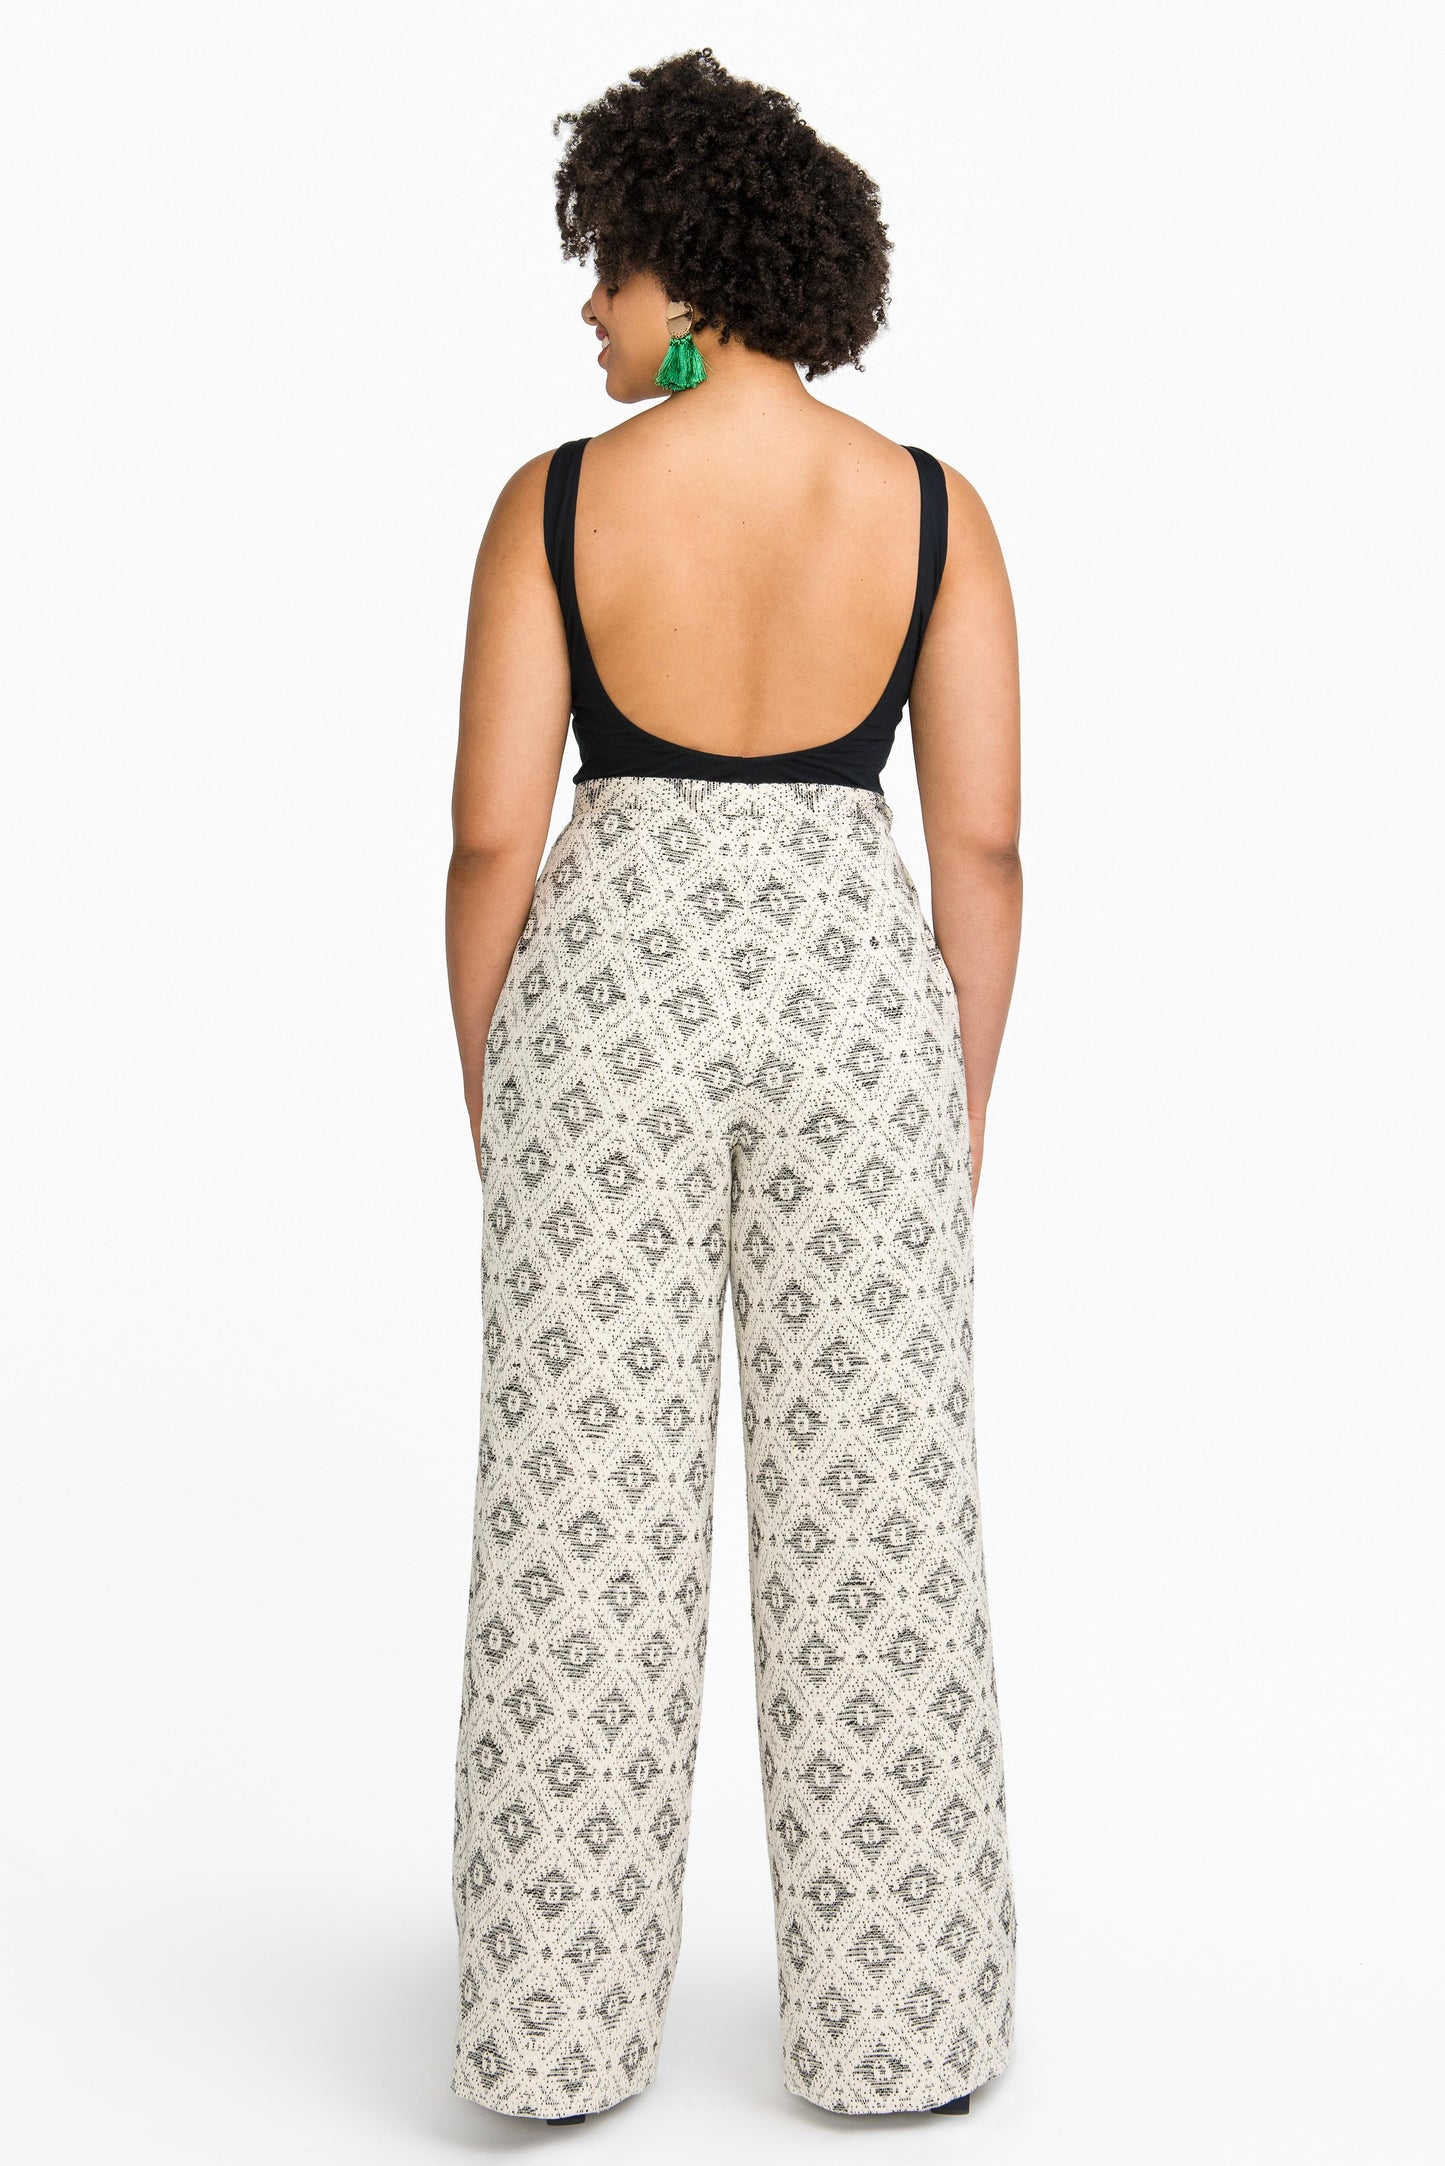 Jenny Overalls and Trousers Sizes 0-20 - Closet Core Patterns